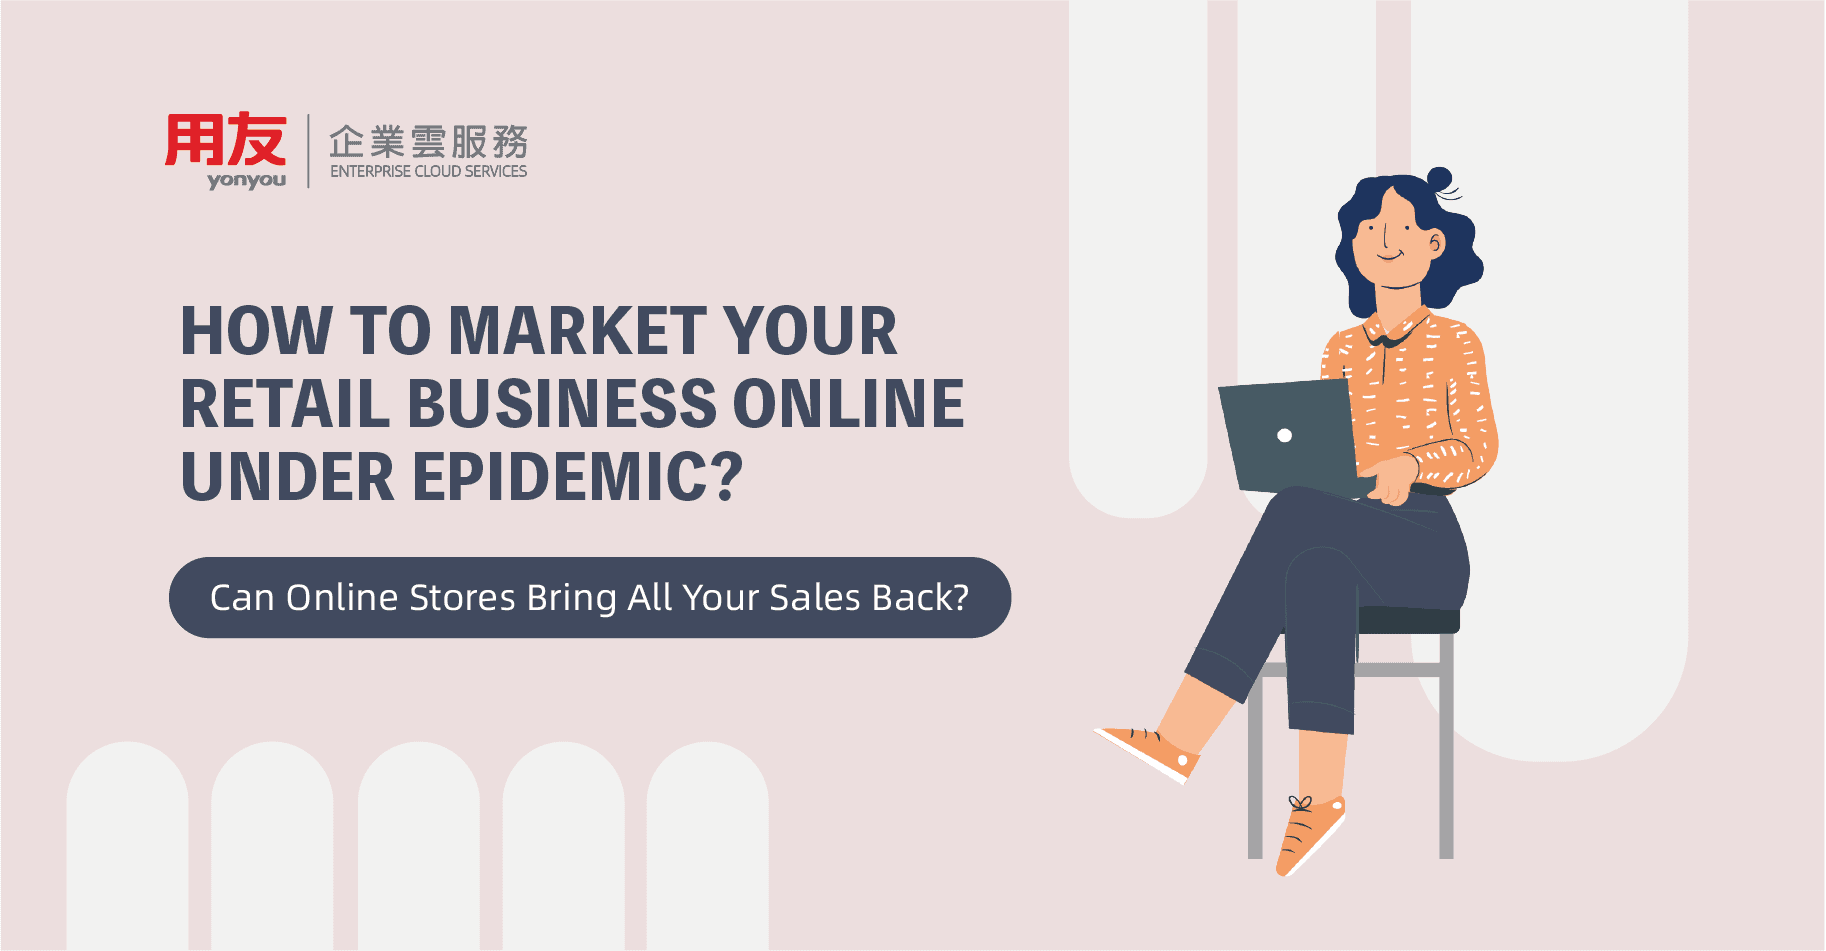 How-to-market-your-retail-business-online-under-epidemic-yonyou